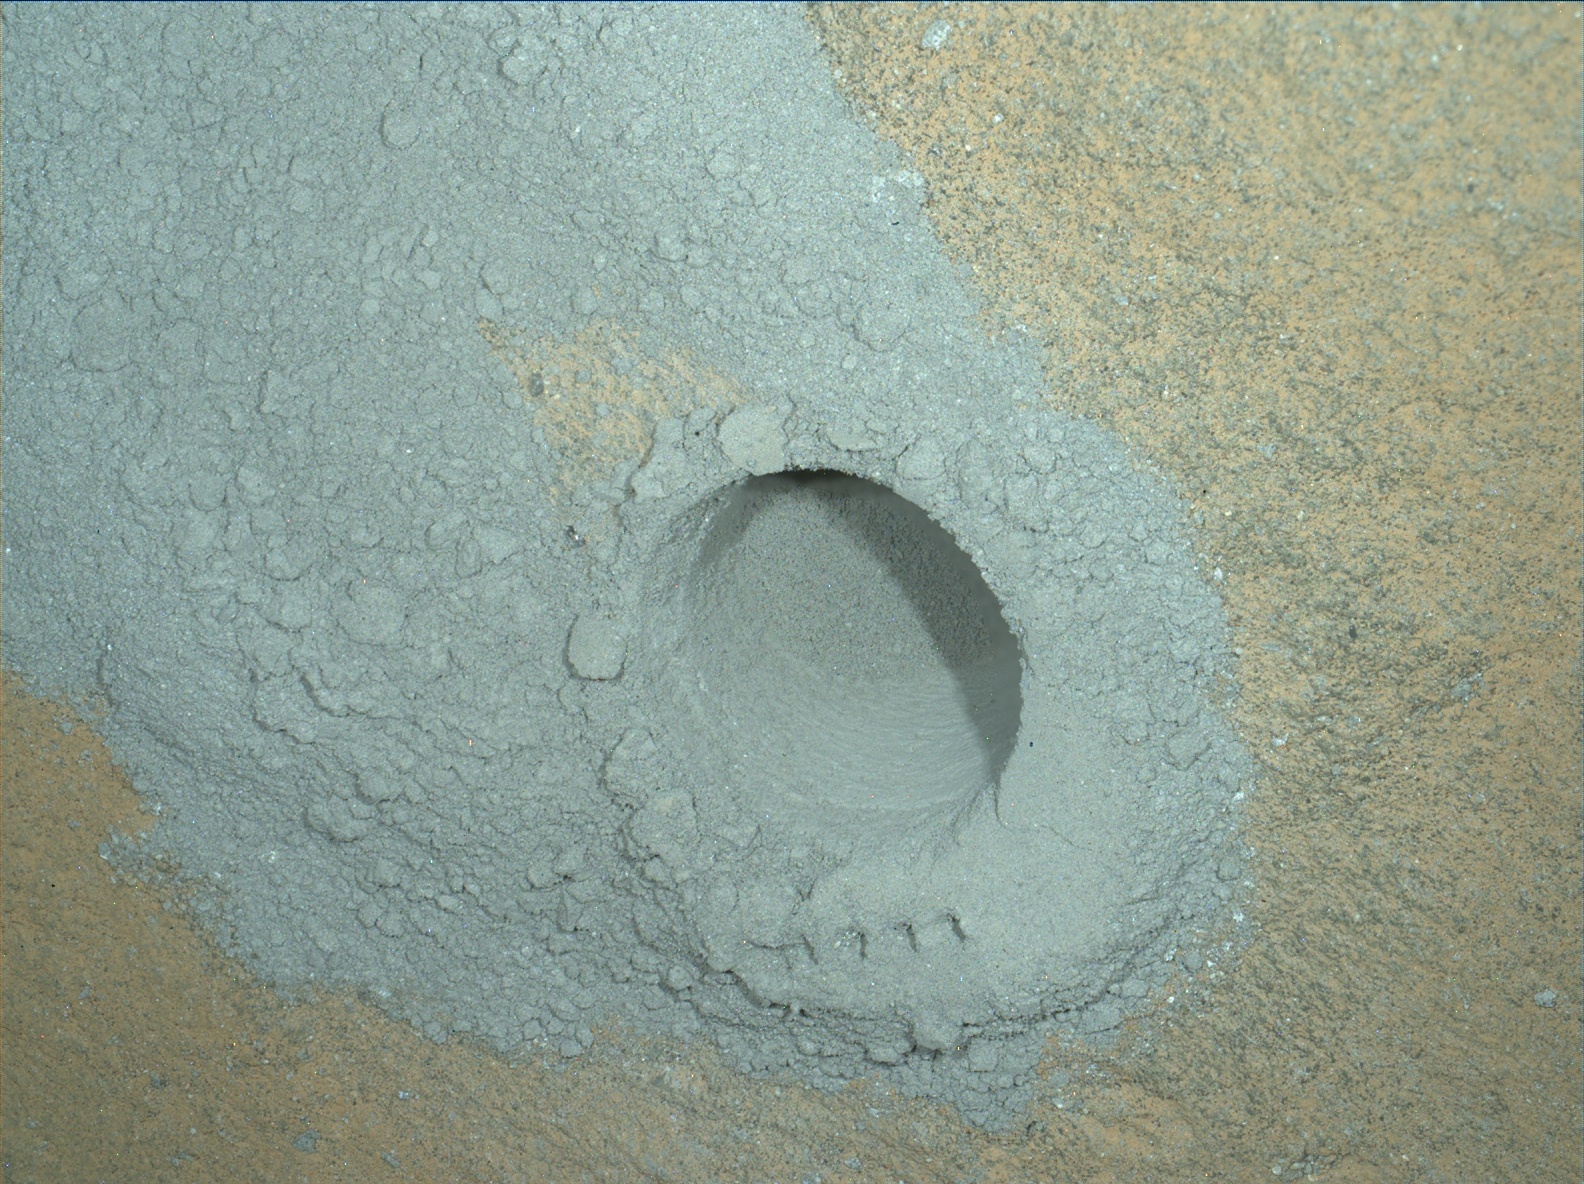 Nasa's Mars rover Curiosity acquired this image using its Mars Hand Lens Imager (MAHLI) on Sol 1124